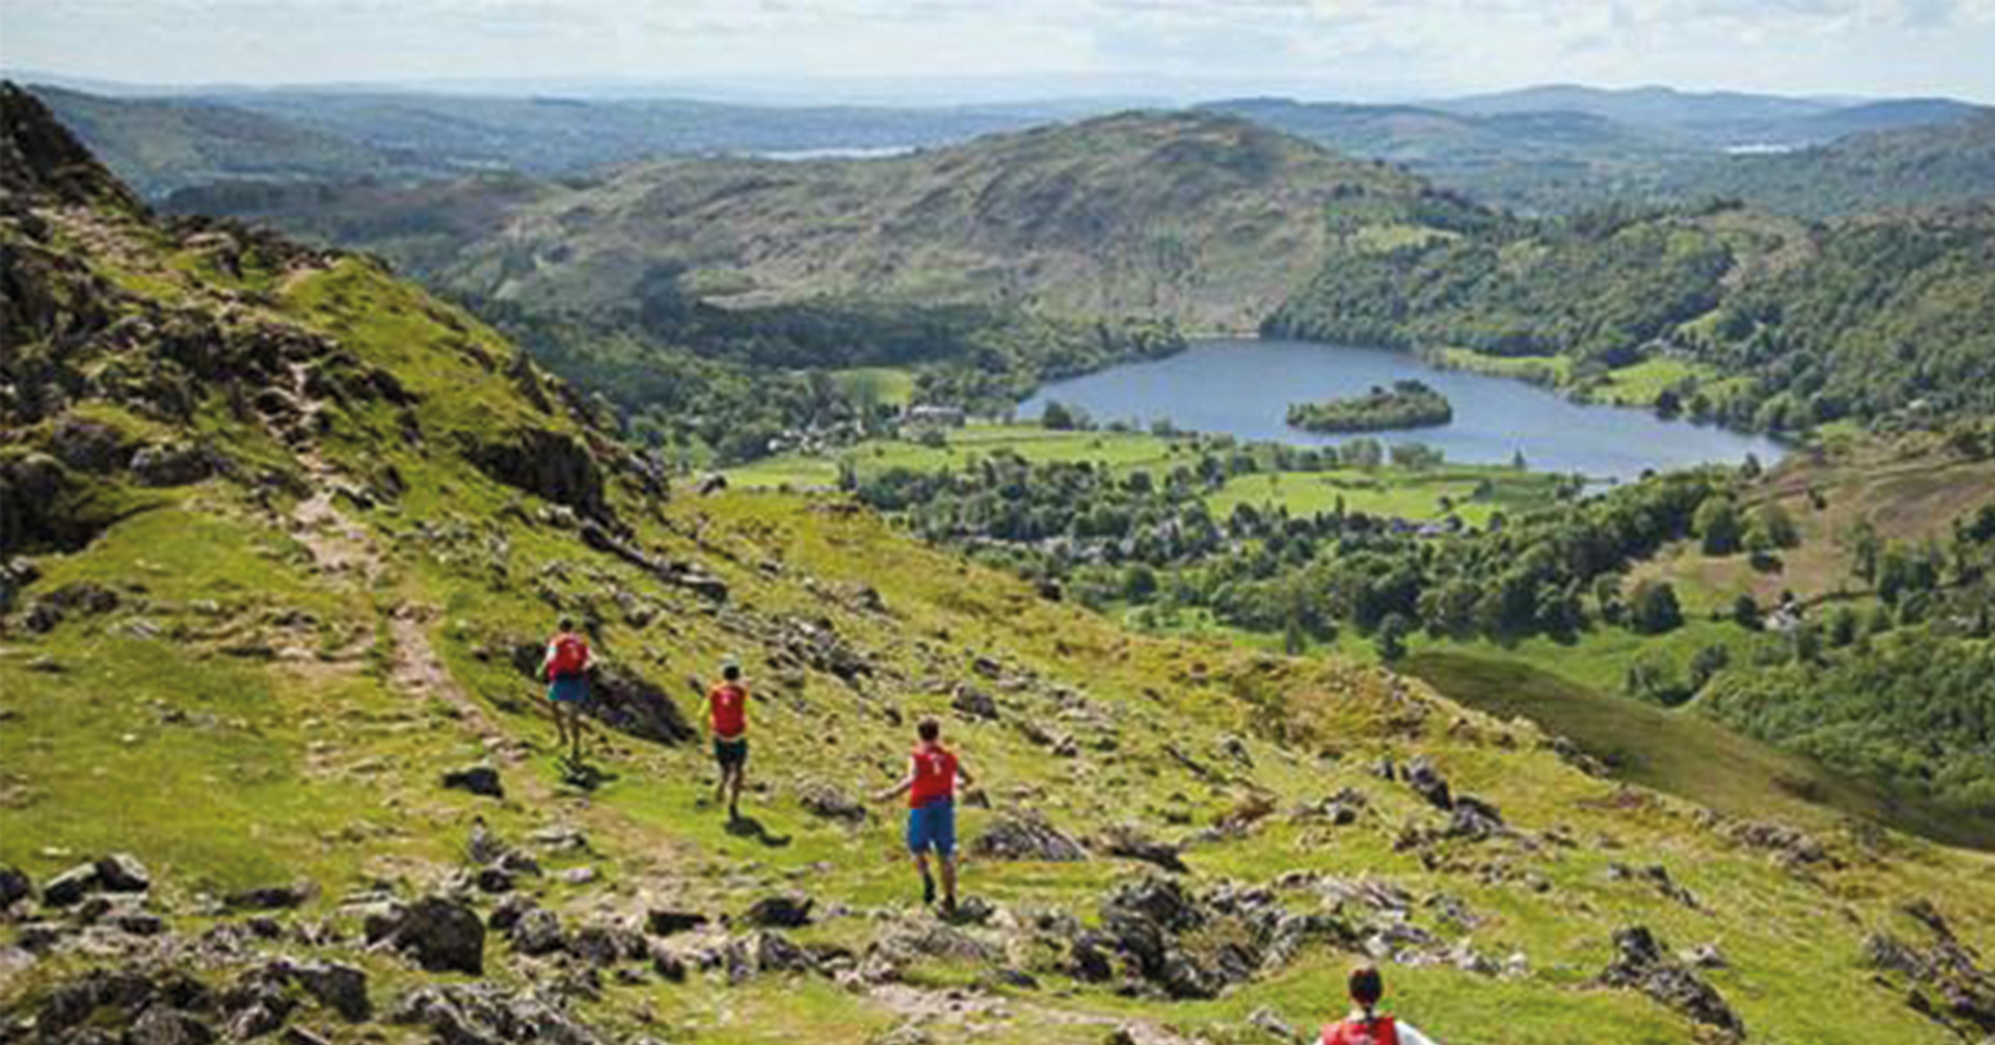 Sweat testing Tribesports kit: Lakes in a Day